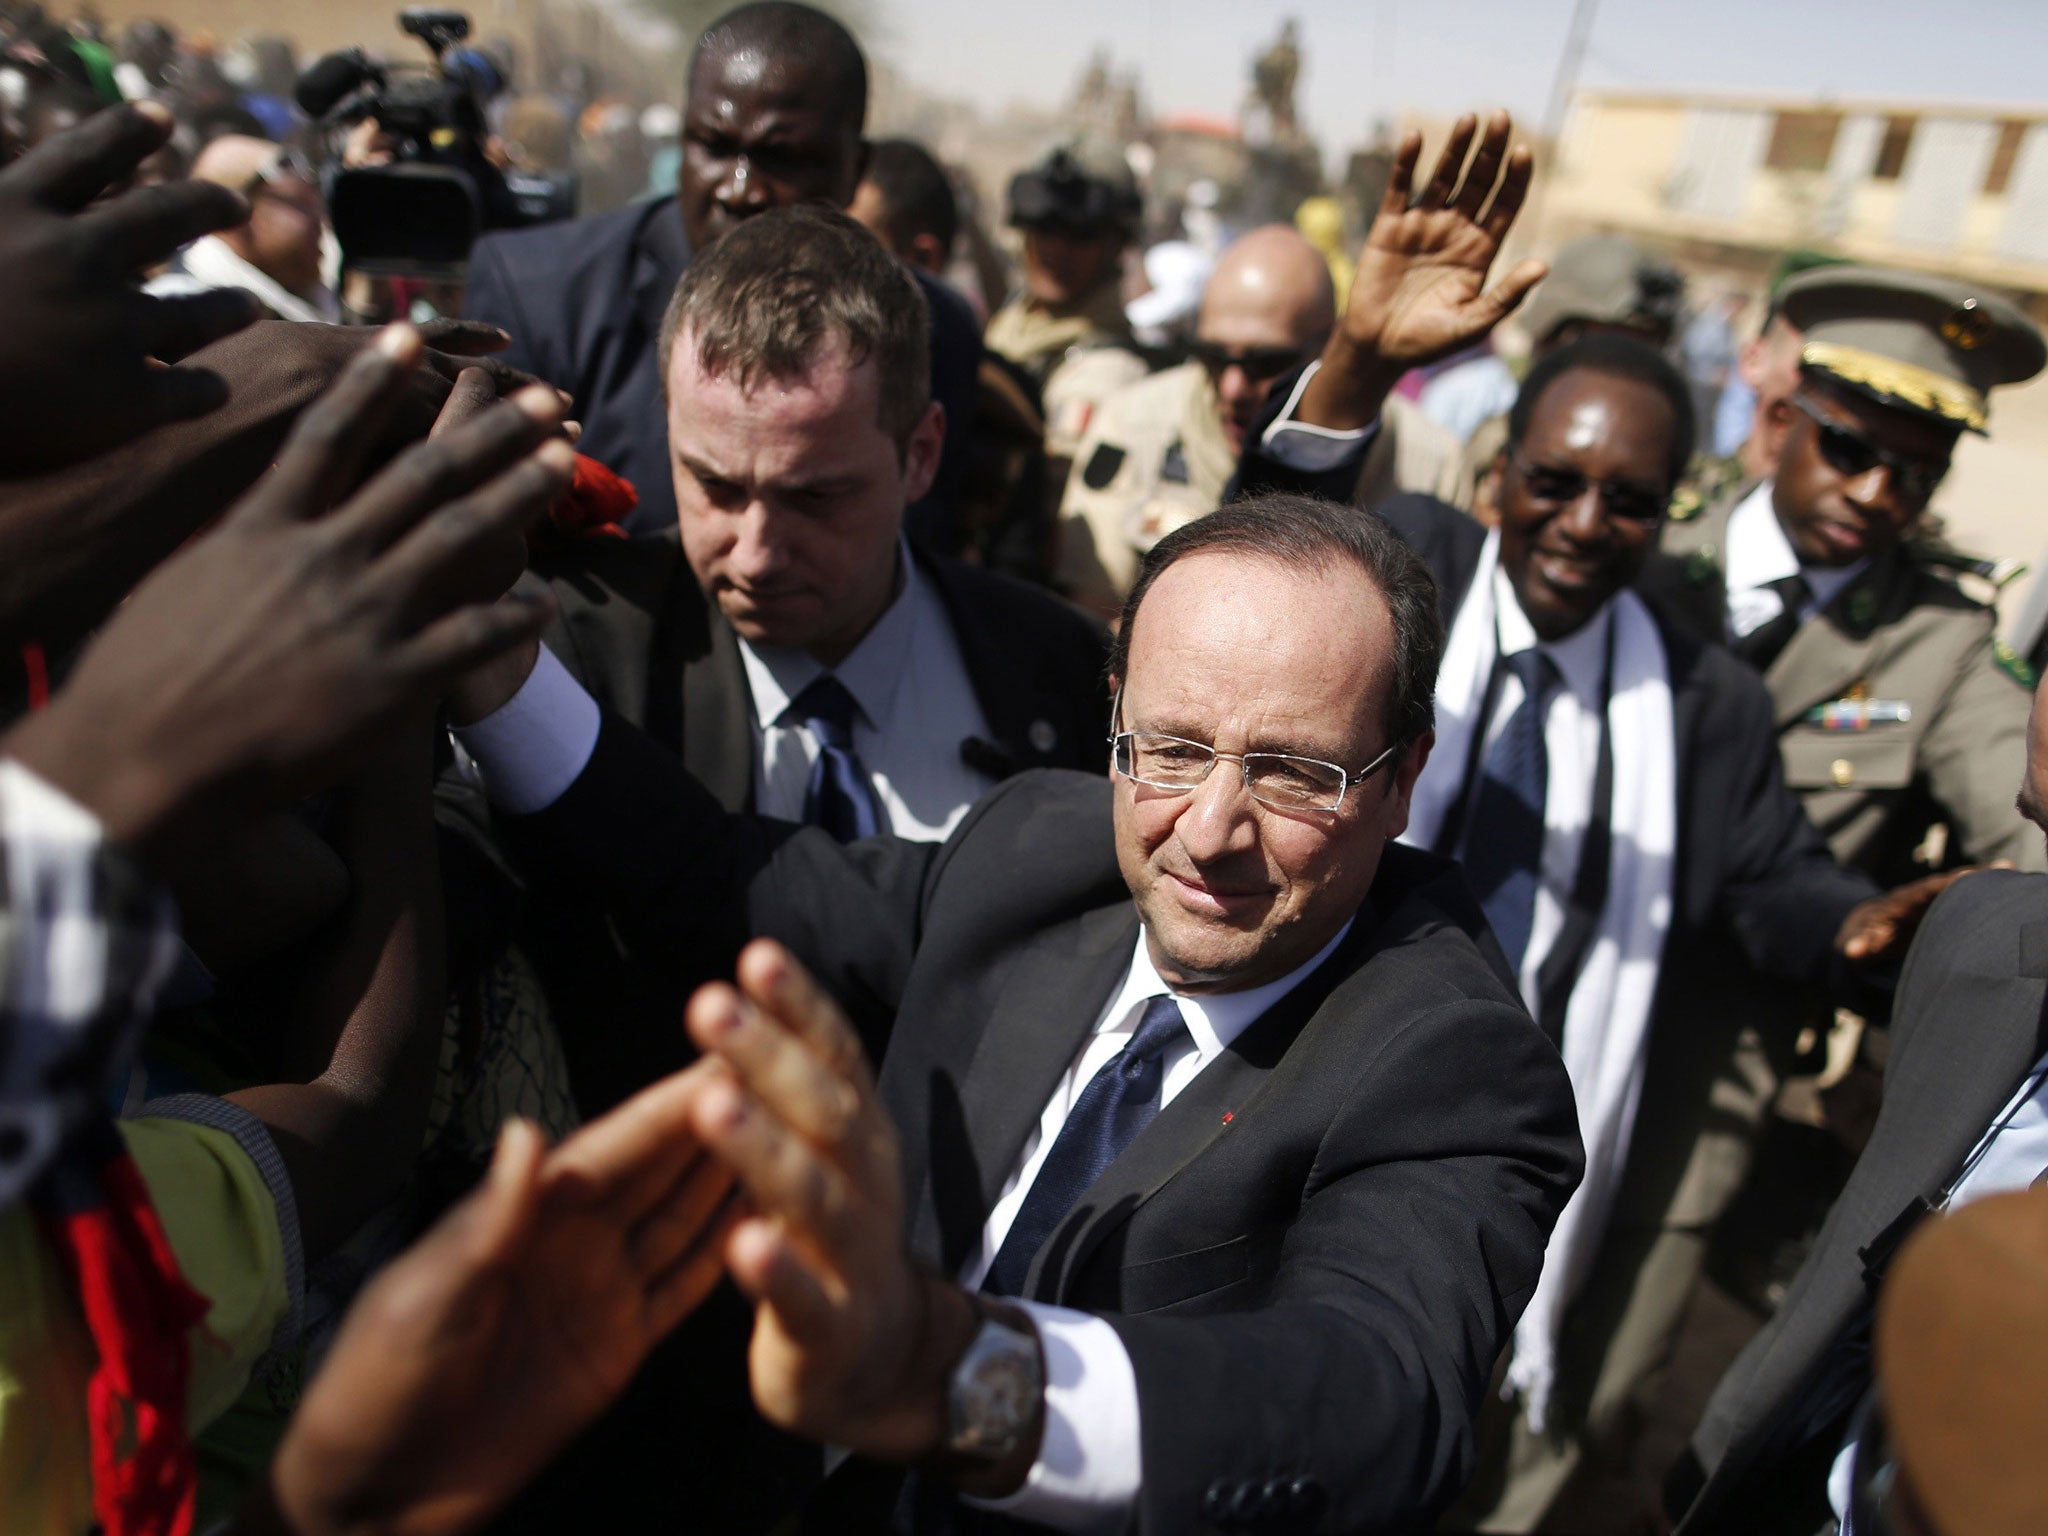 Warm welcome: François Hollande is mobbed by crowds in Timbuktu